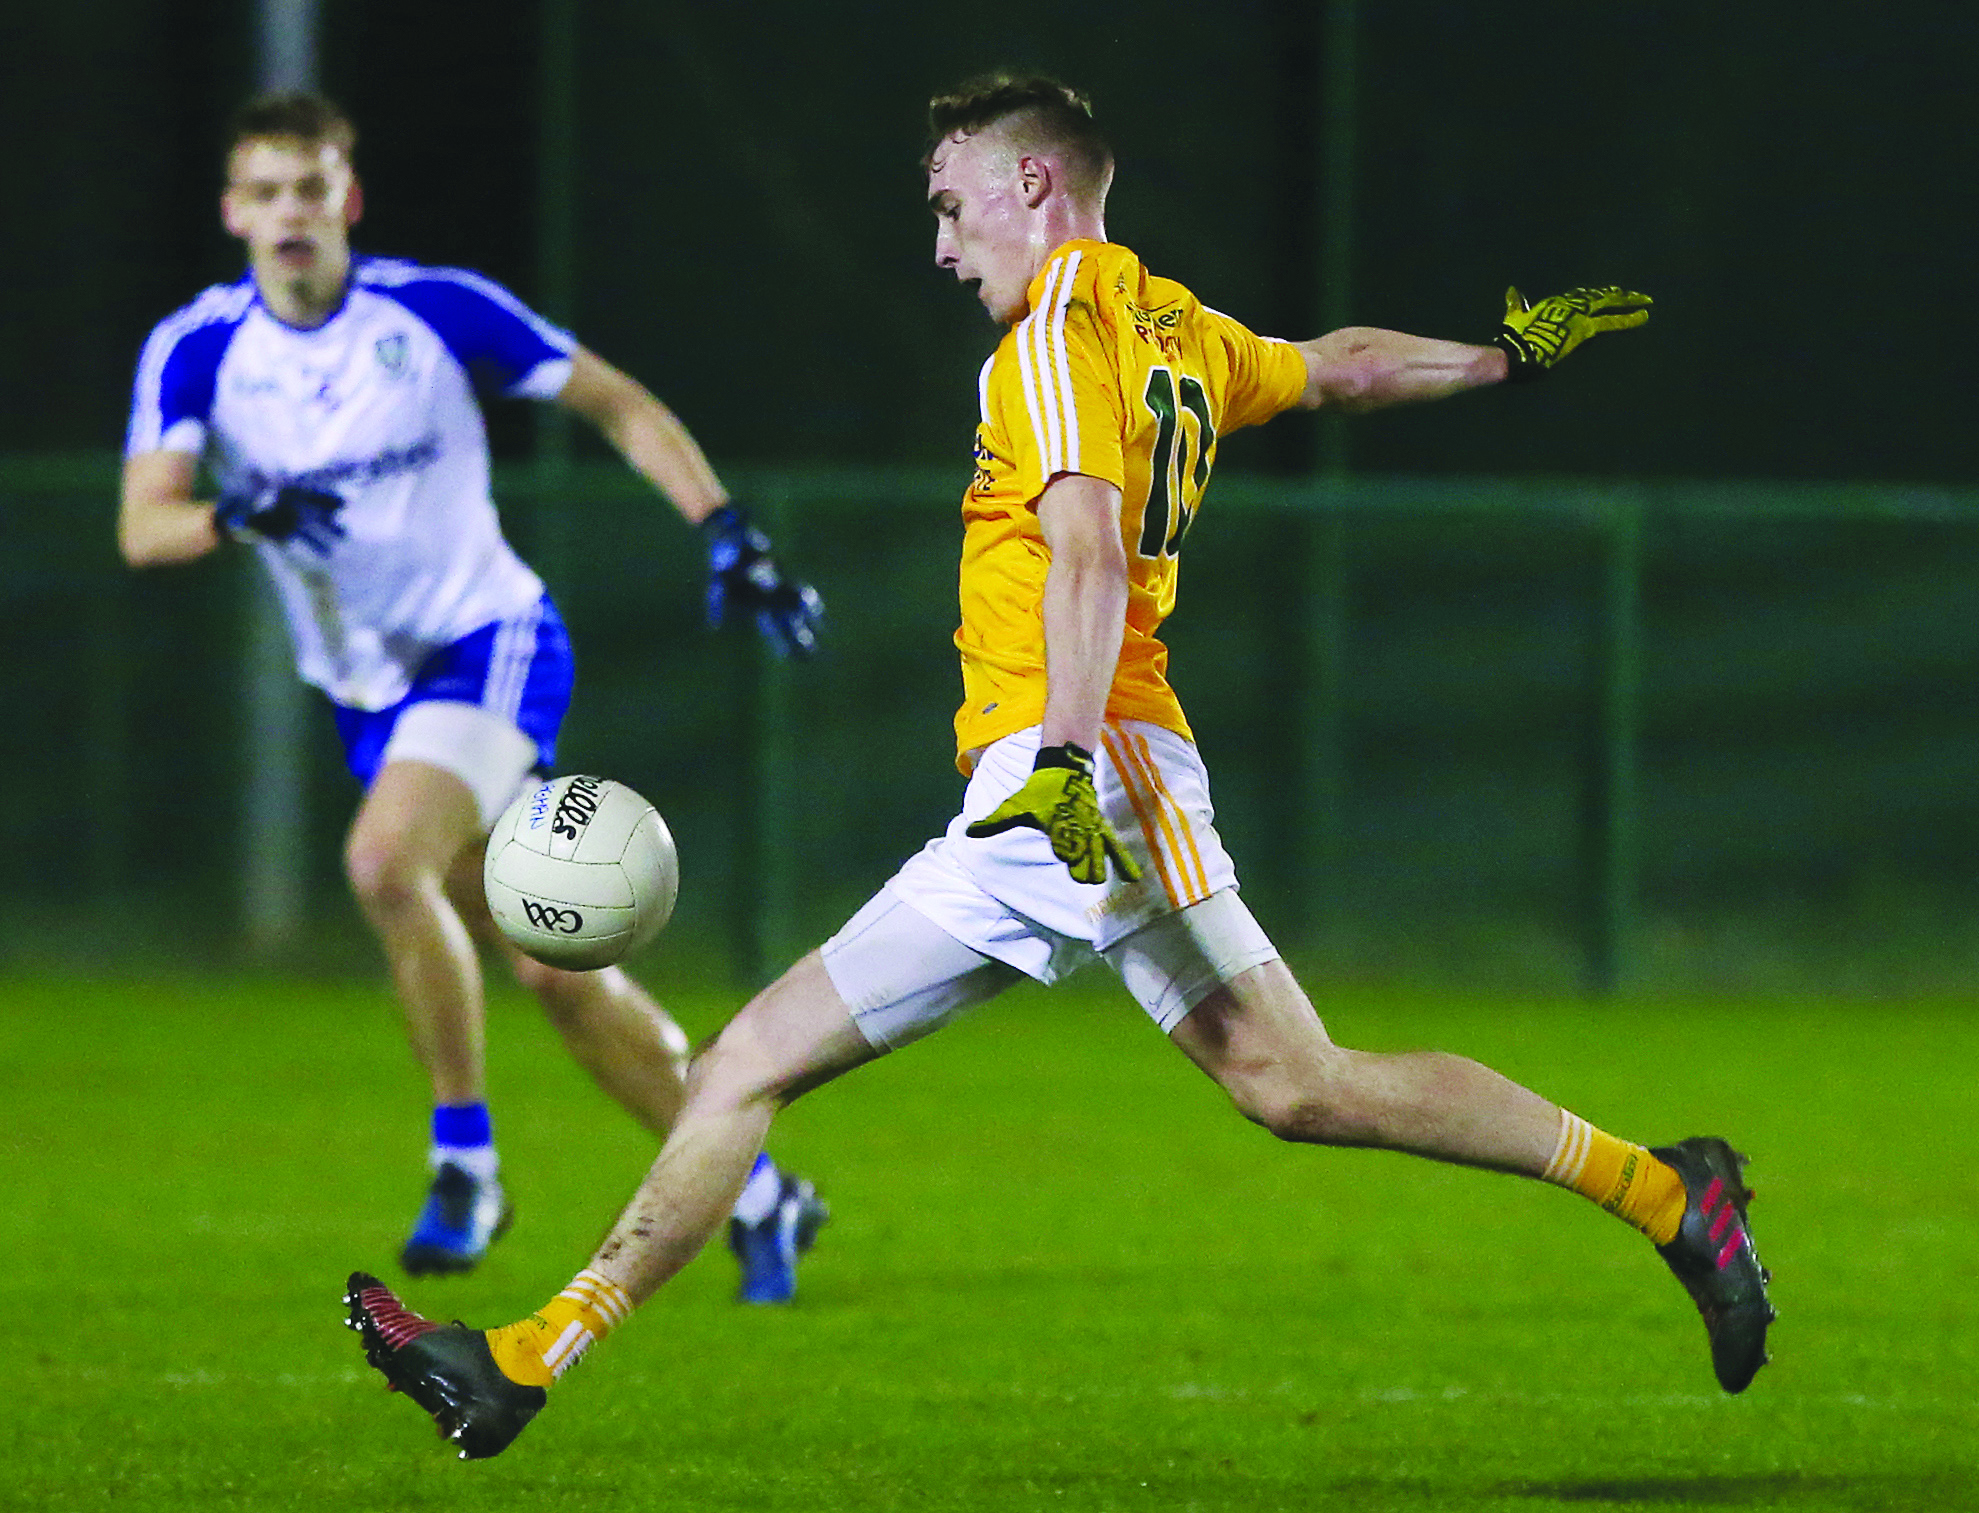 Antrim’s Seamus McGarry could be in line to make his senior NFL debut against Laois this Sunday after scoring 0-8 in last week’s U21 Football Championship loss to Monaghan